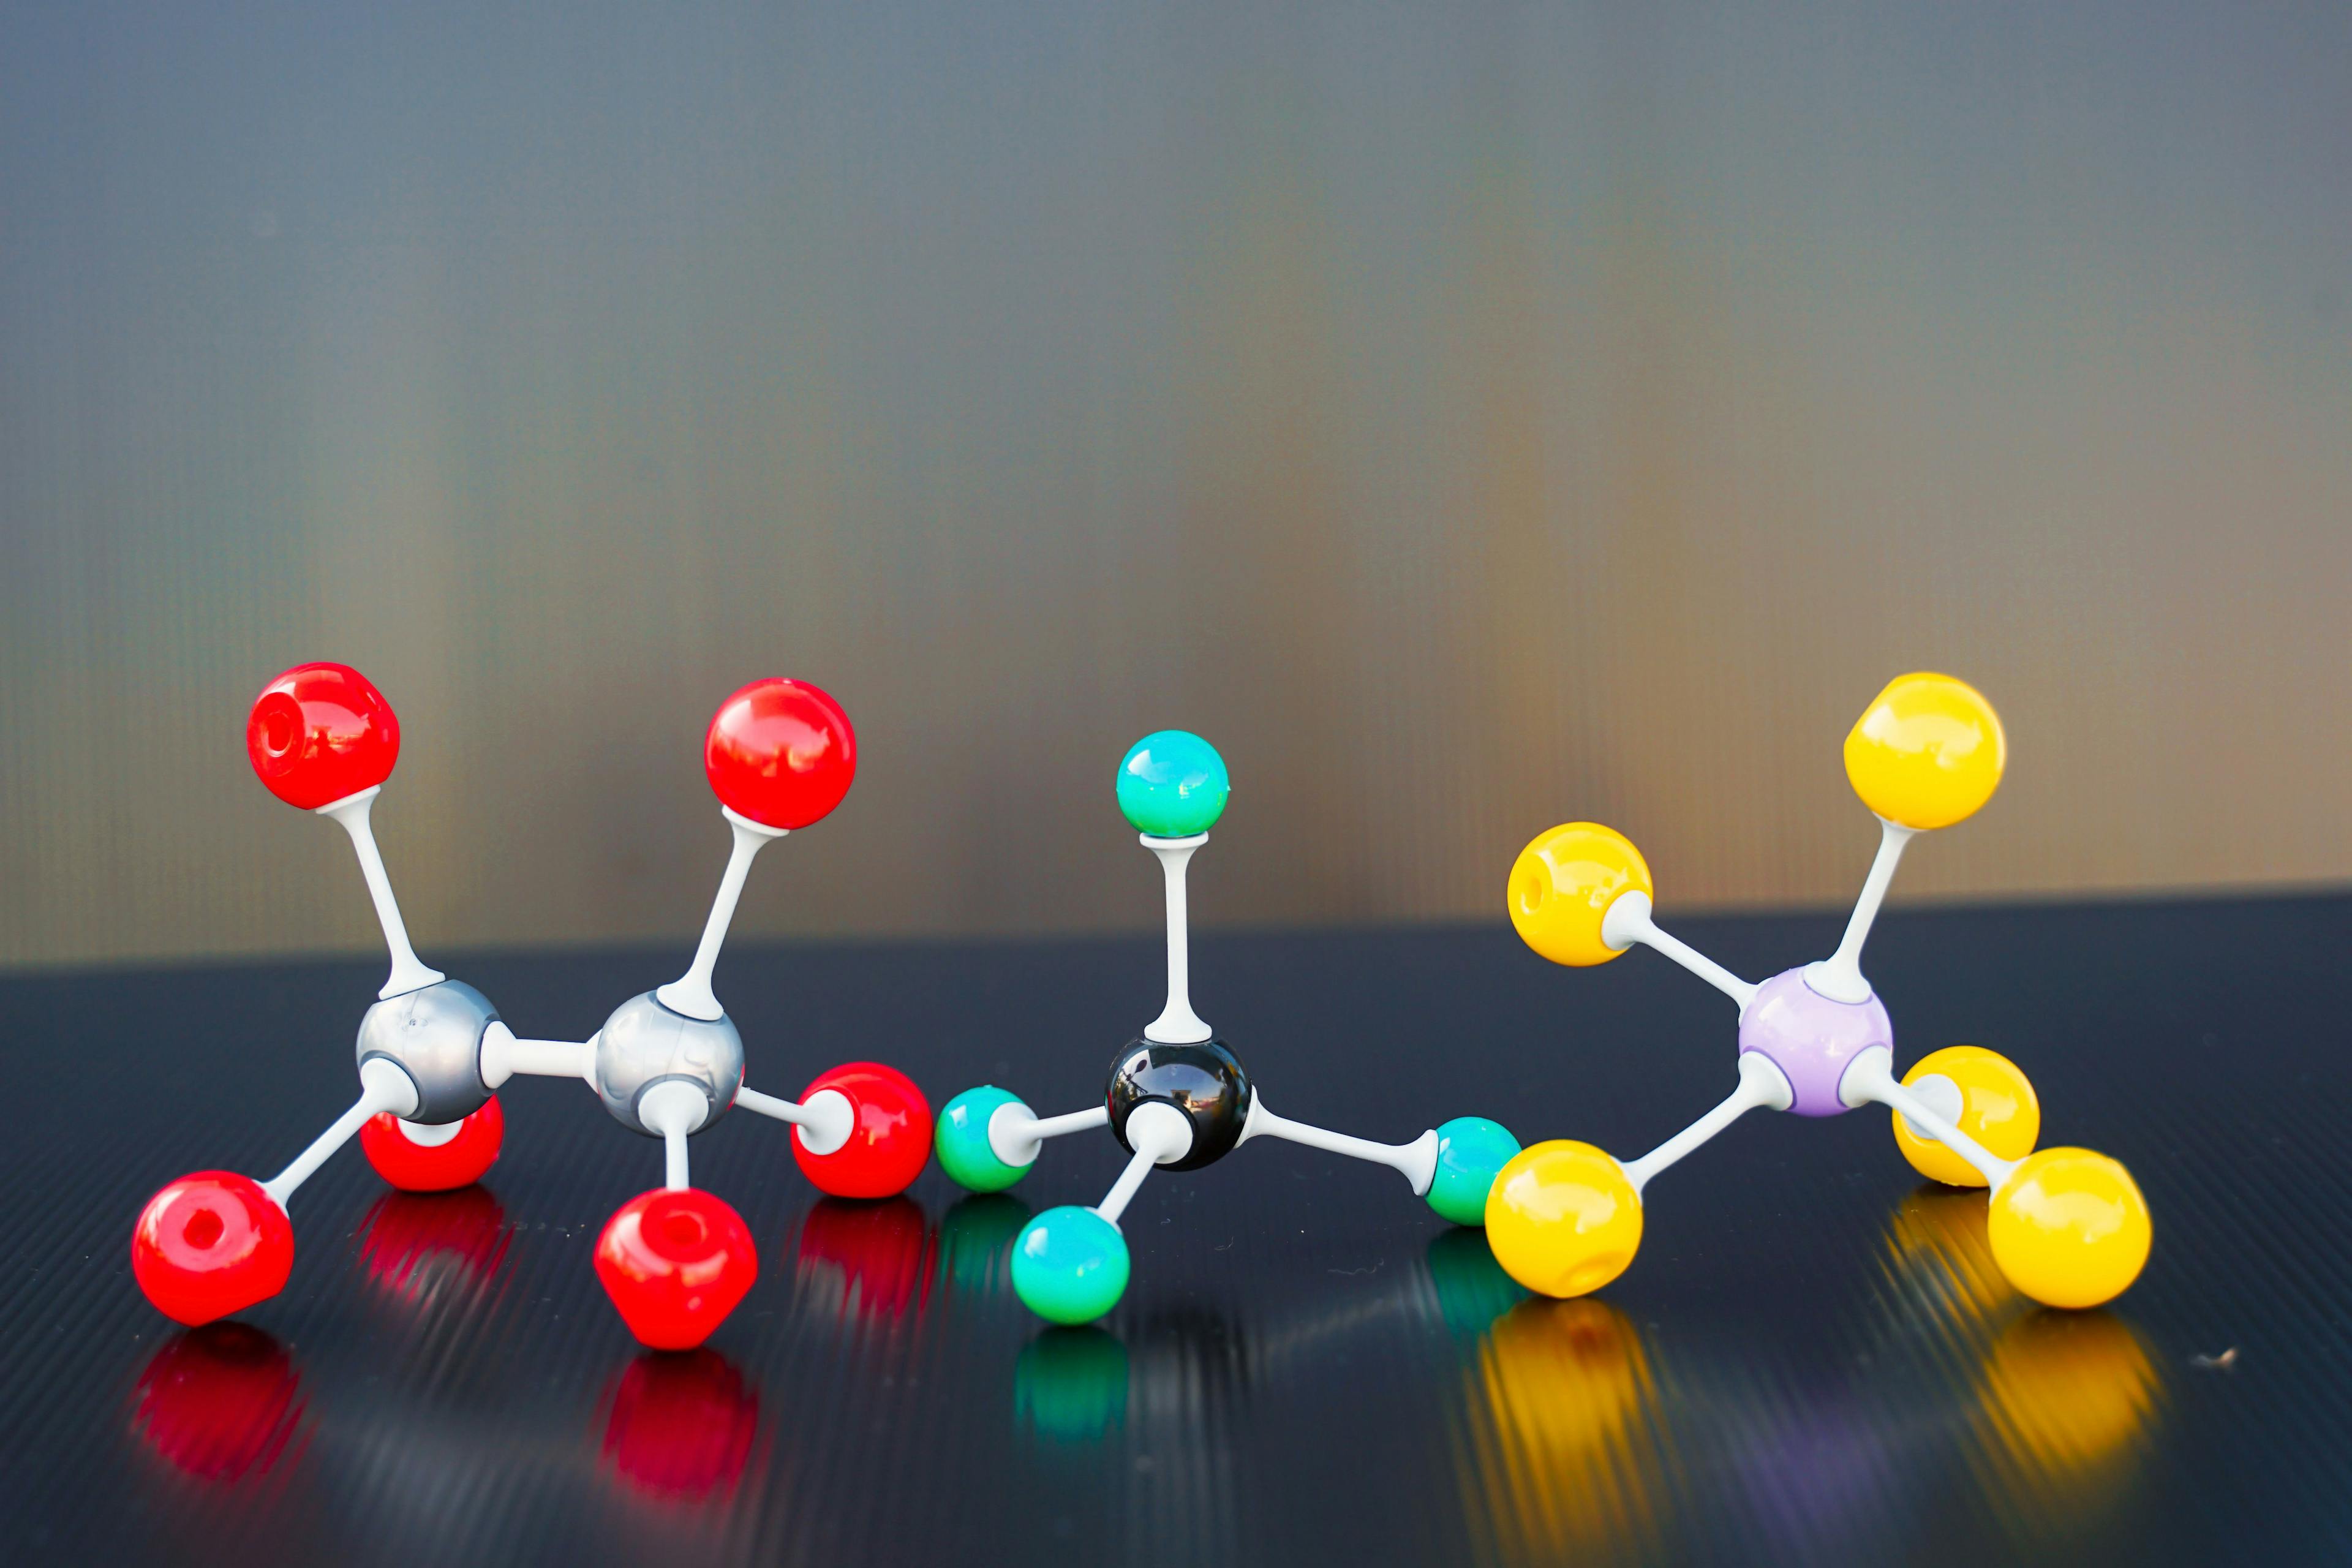 Simulate Shape of covalent molecules on black background. Soft and selective focus. | Image Credit: © Aoy_Charin - stock.adobe.com